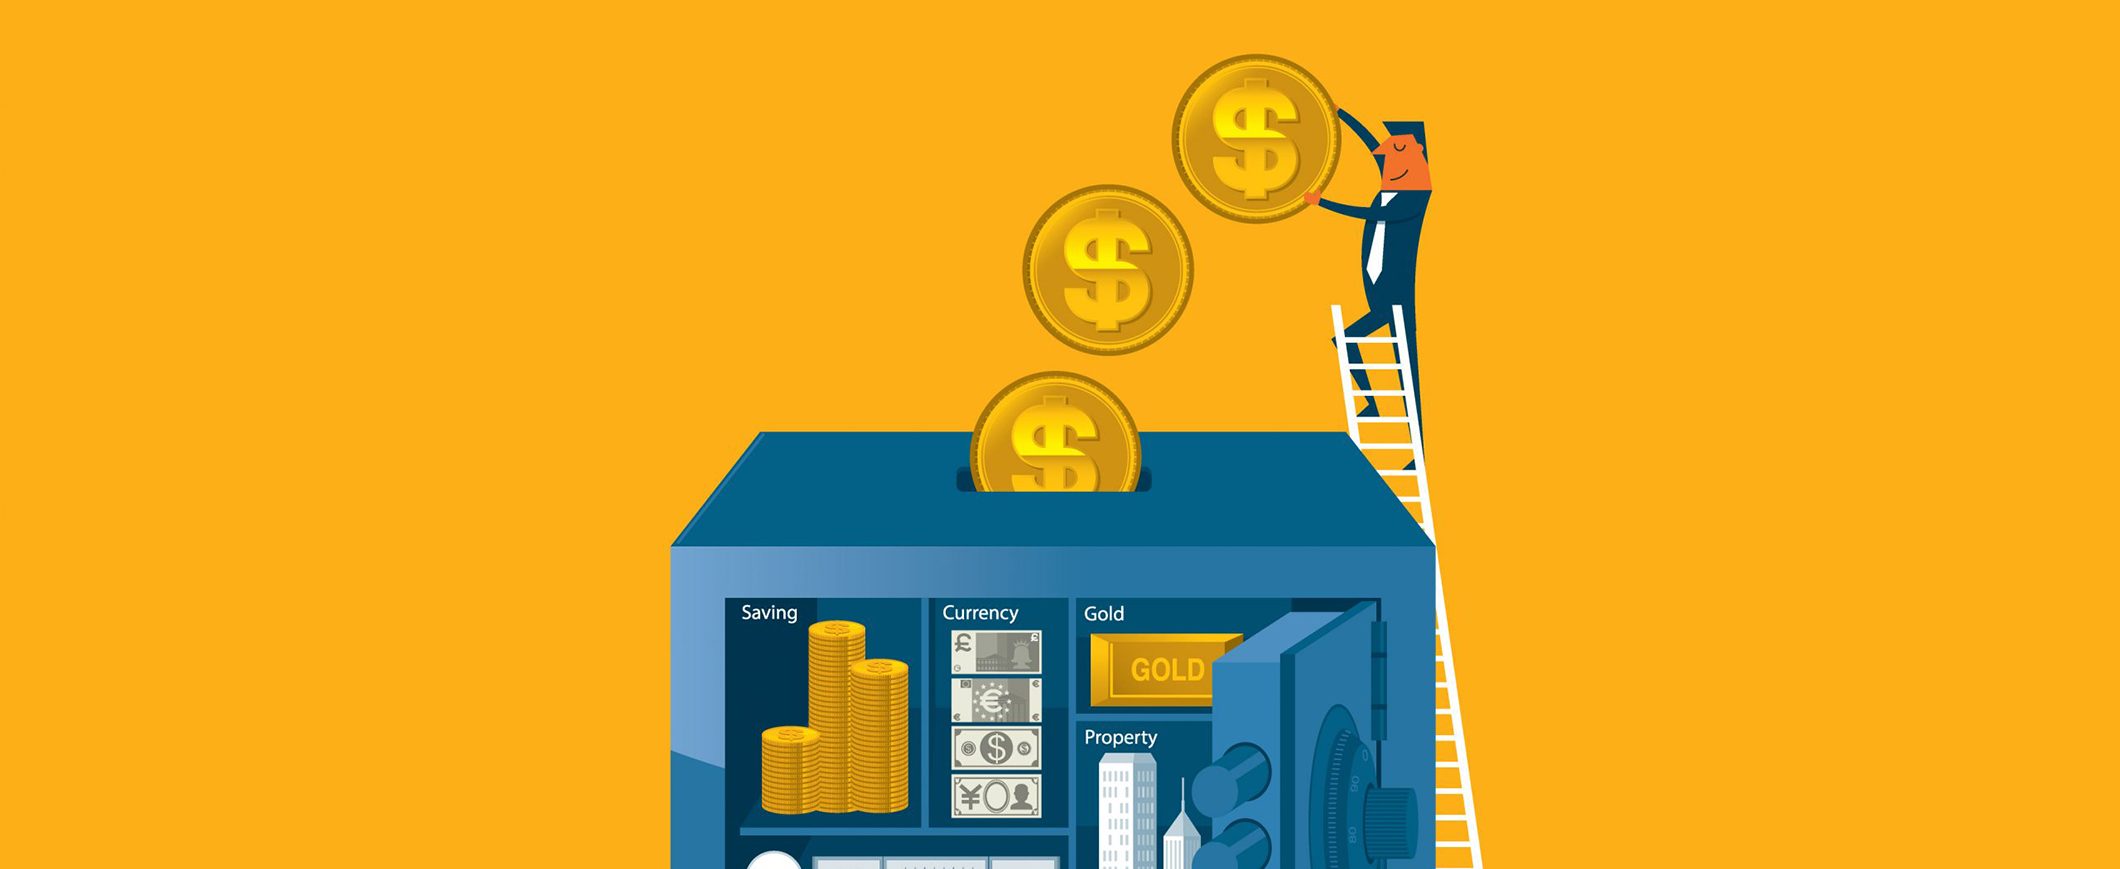 A graphic of a man wearing a suit at the top of a ladder, which is leaning against an open safe. He is holding a giant coin and dropping it through a slot in the safe.